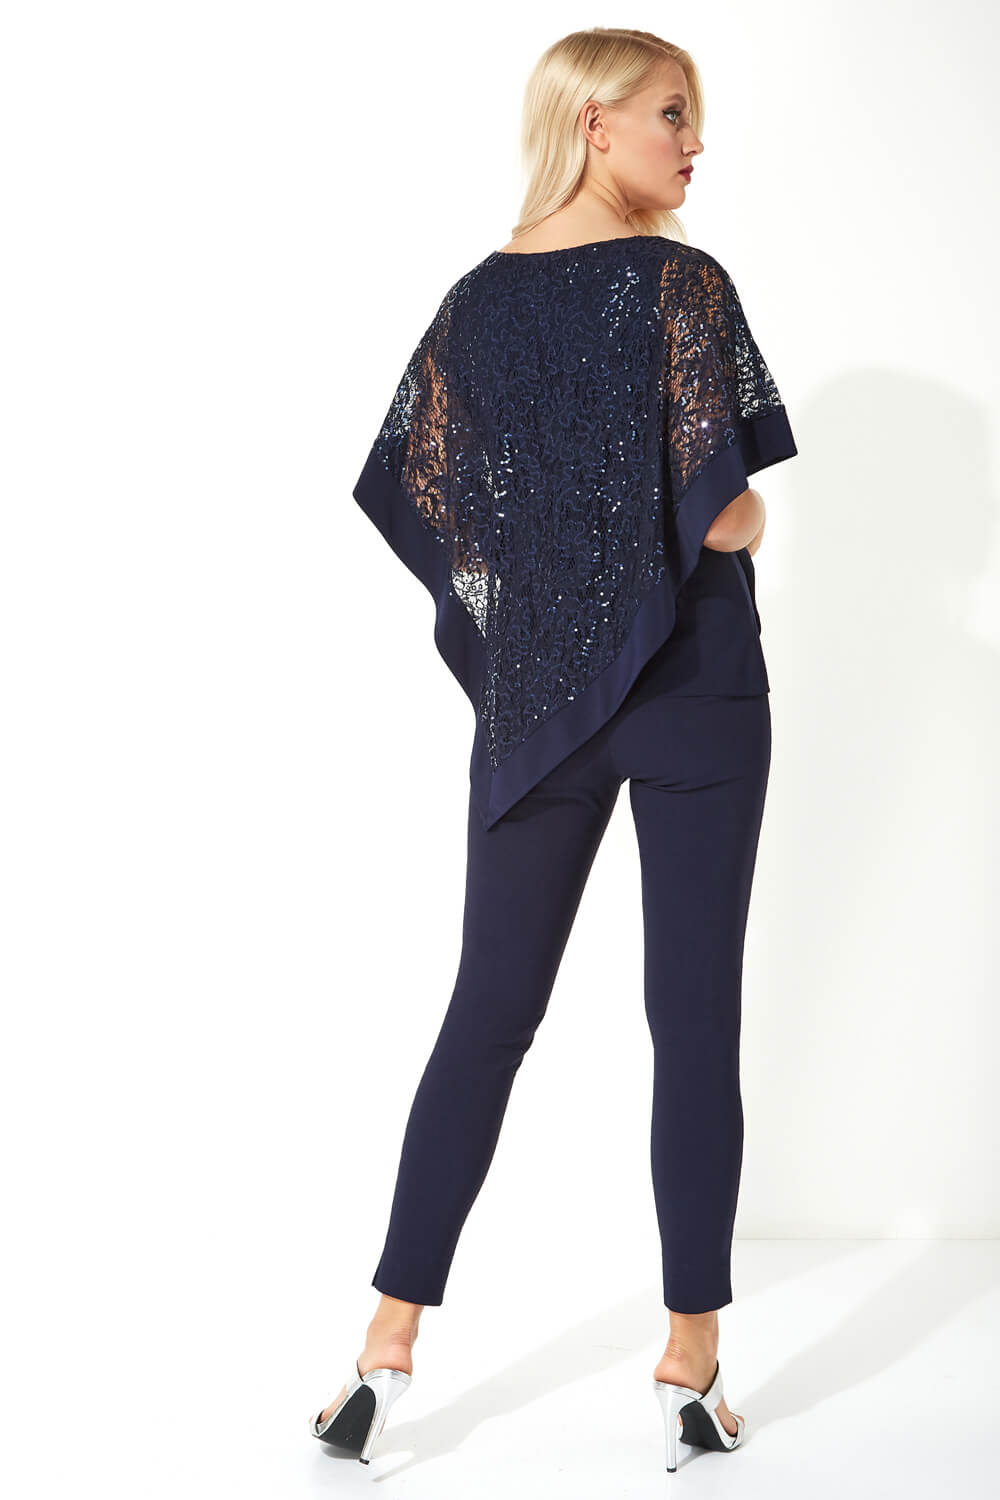 Midnight Blue Sequin Embellished Overlay Top, Image 3 of 5